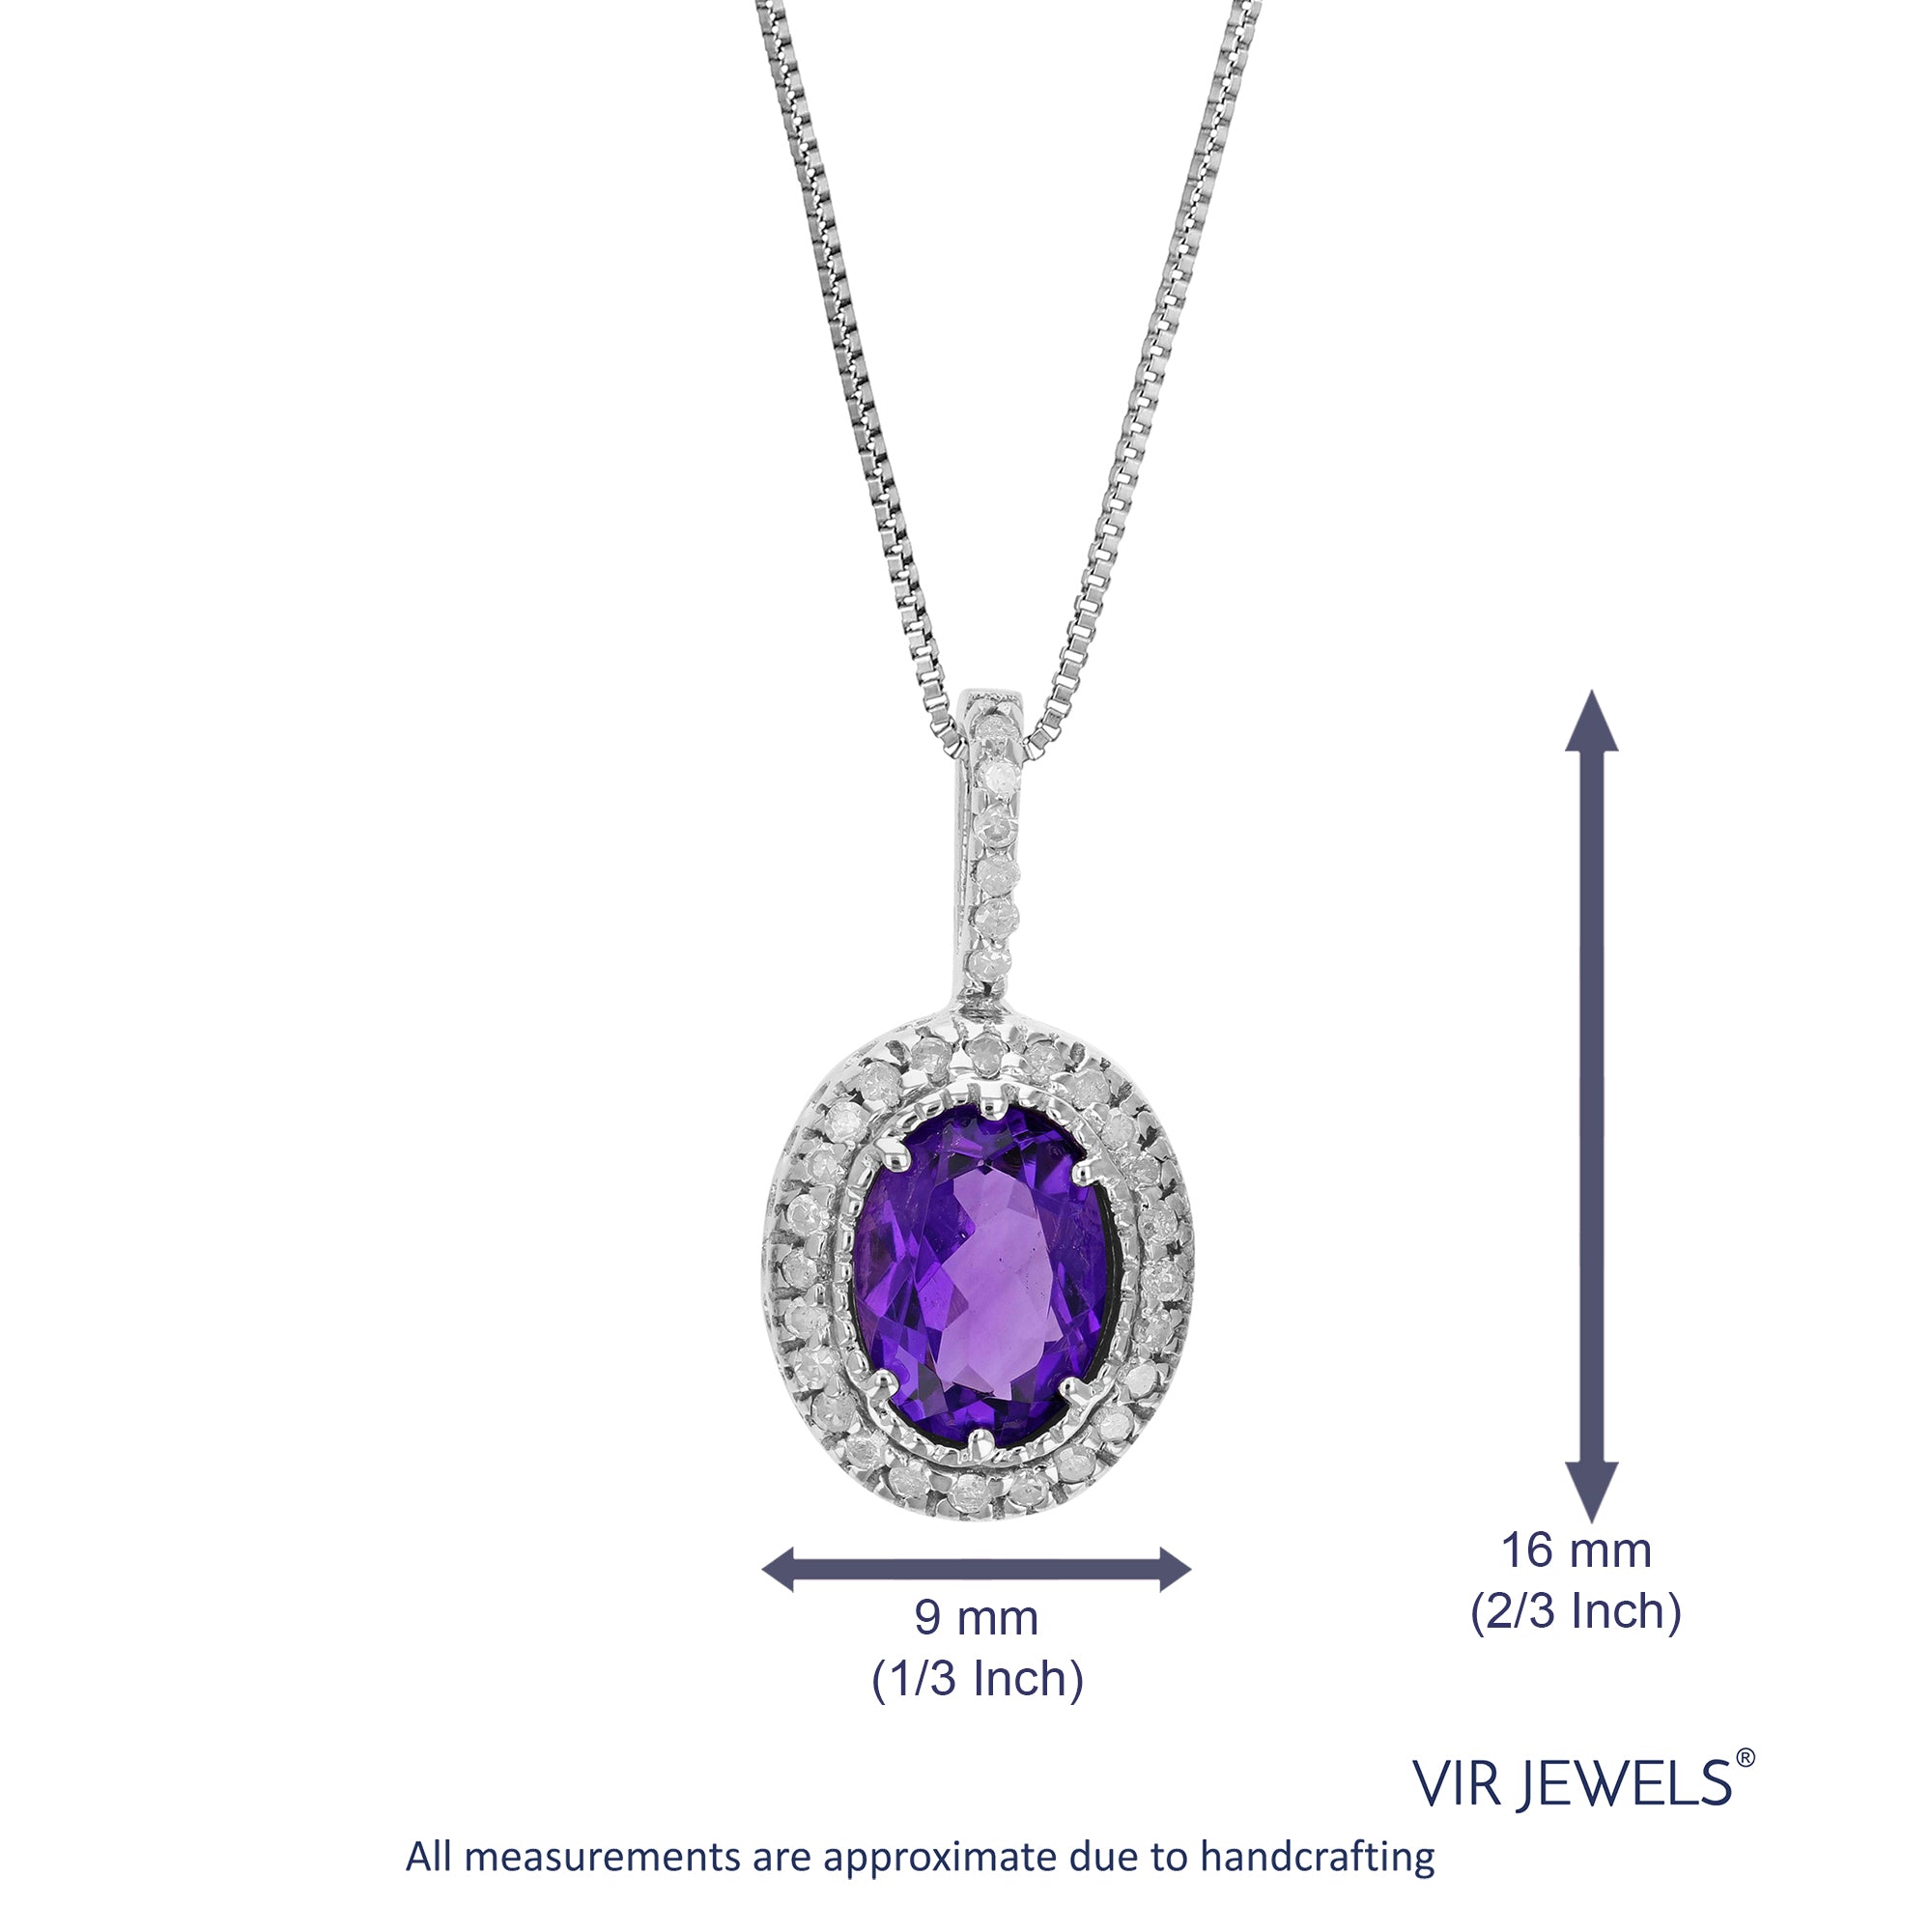 1.30 cttw Diamond Pendant, Amethyst and Diamond Pendant Necklace for Women in 14K White Gold with 18 Inch Chain, Prong Setting